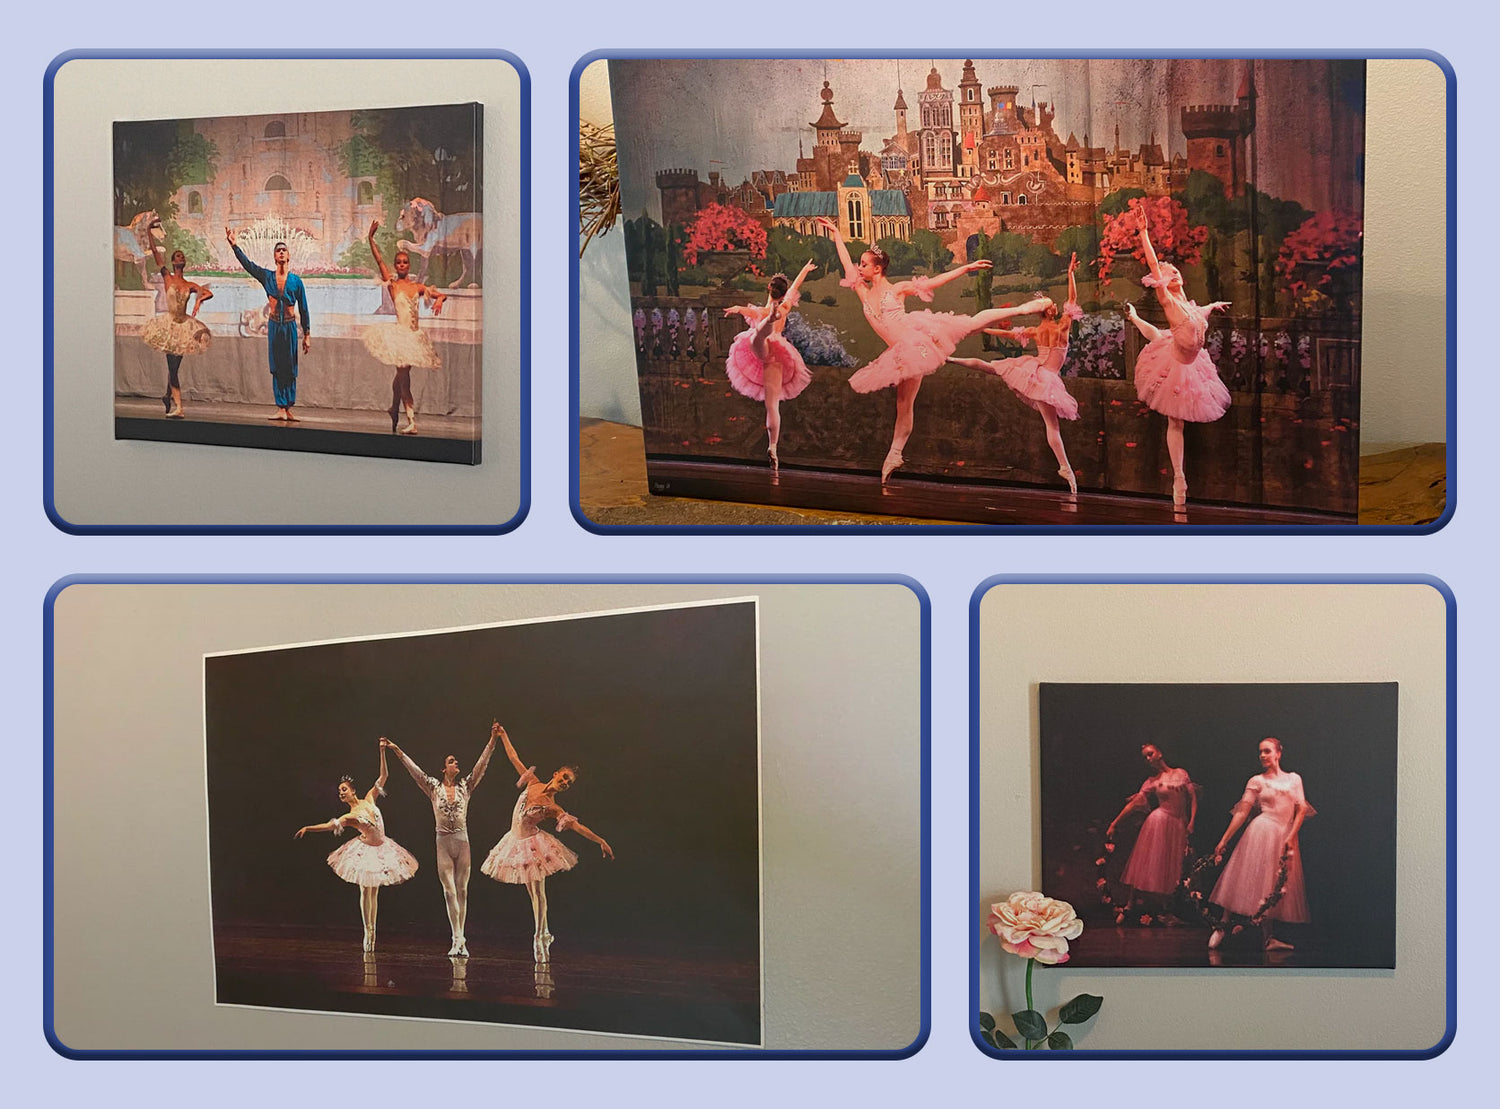 4 photos of dance art paintings of dancers performing on stage